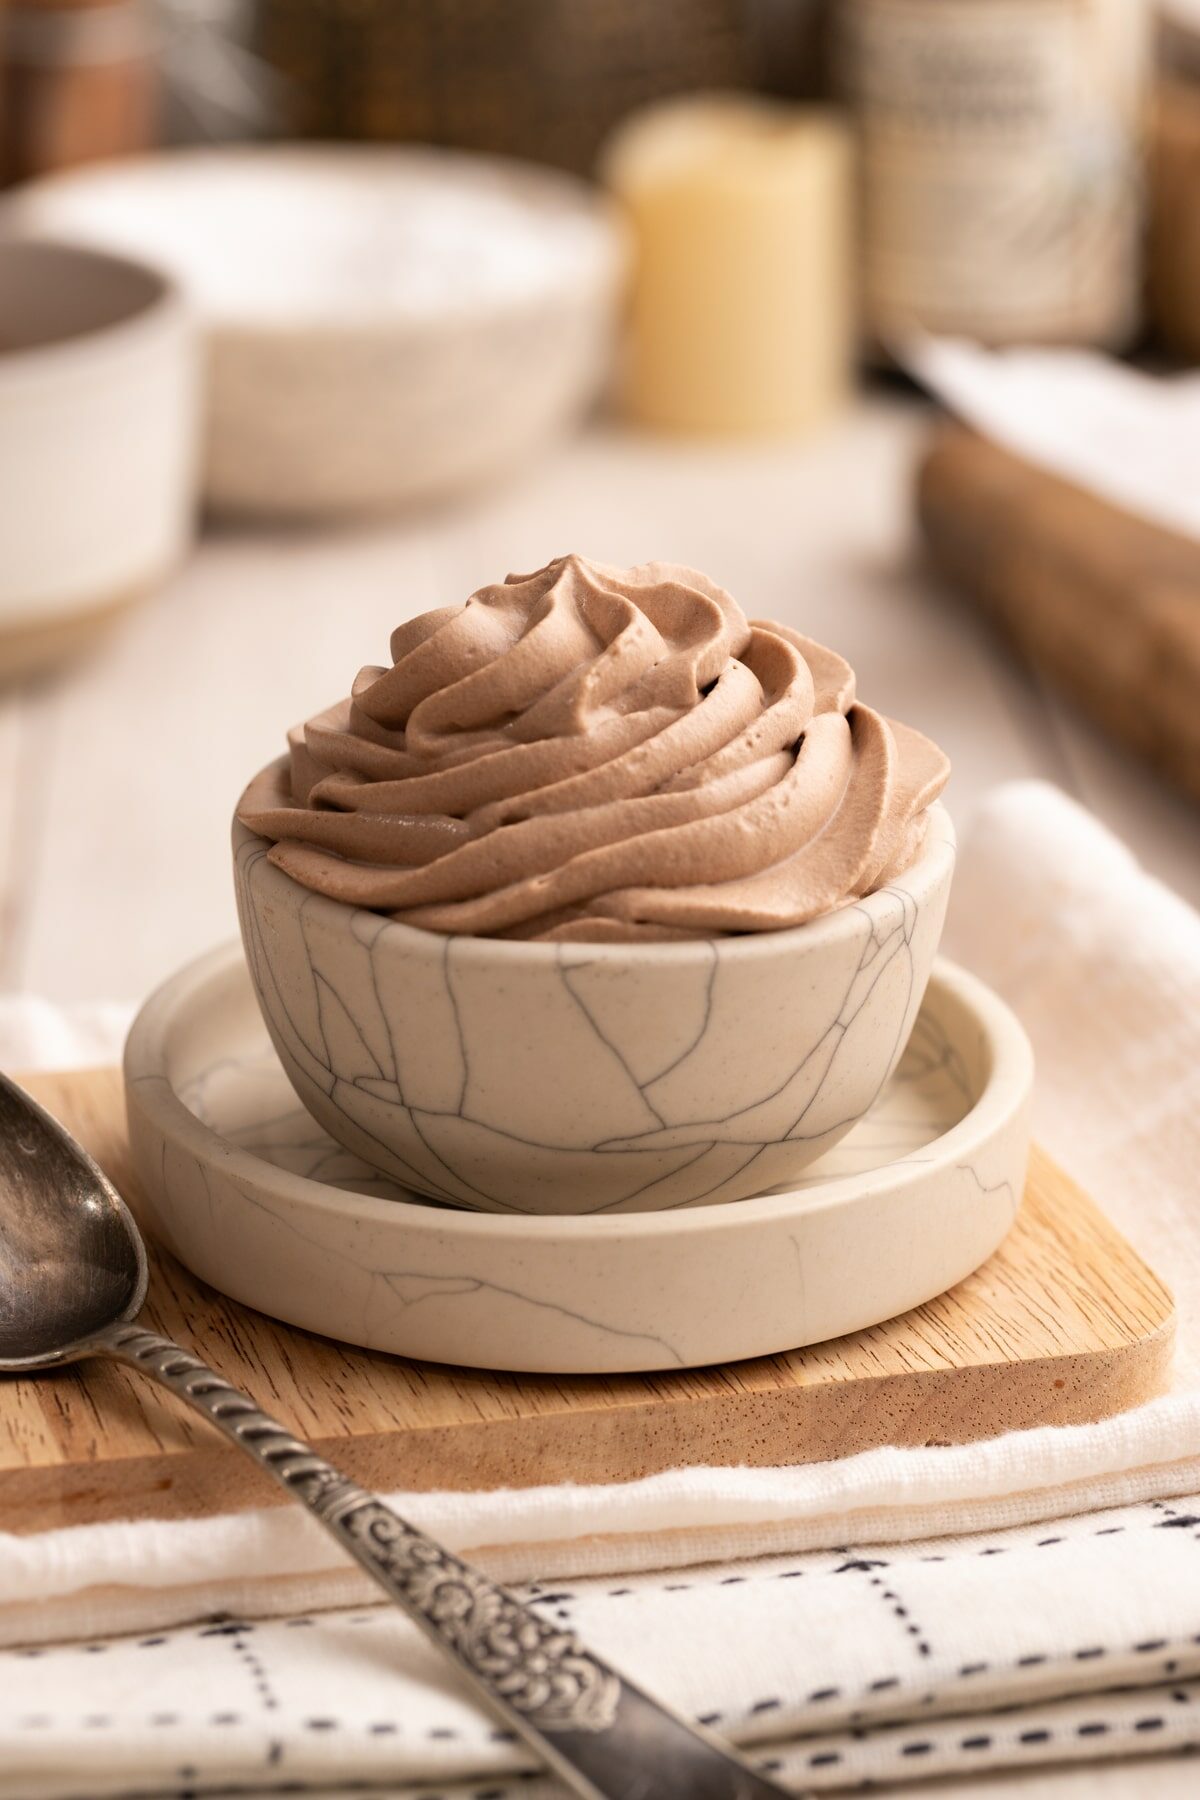 Chocolate Whipped Cream piped in serving bowl up close.